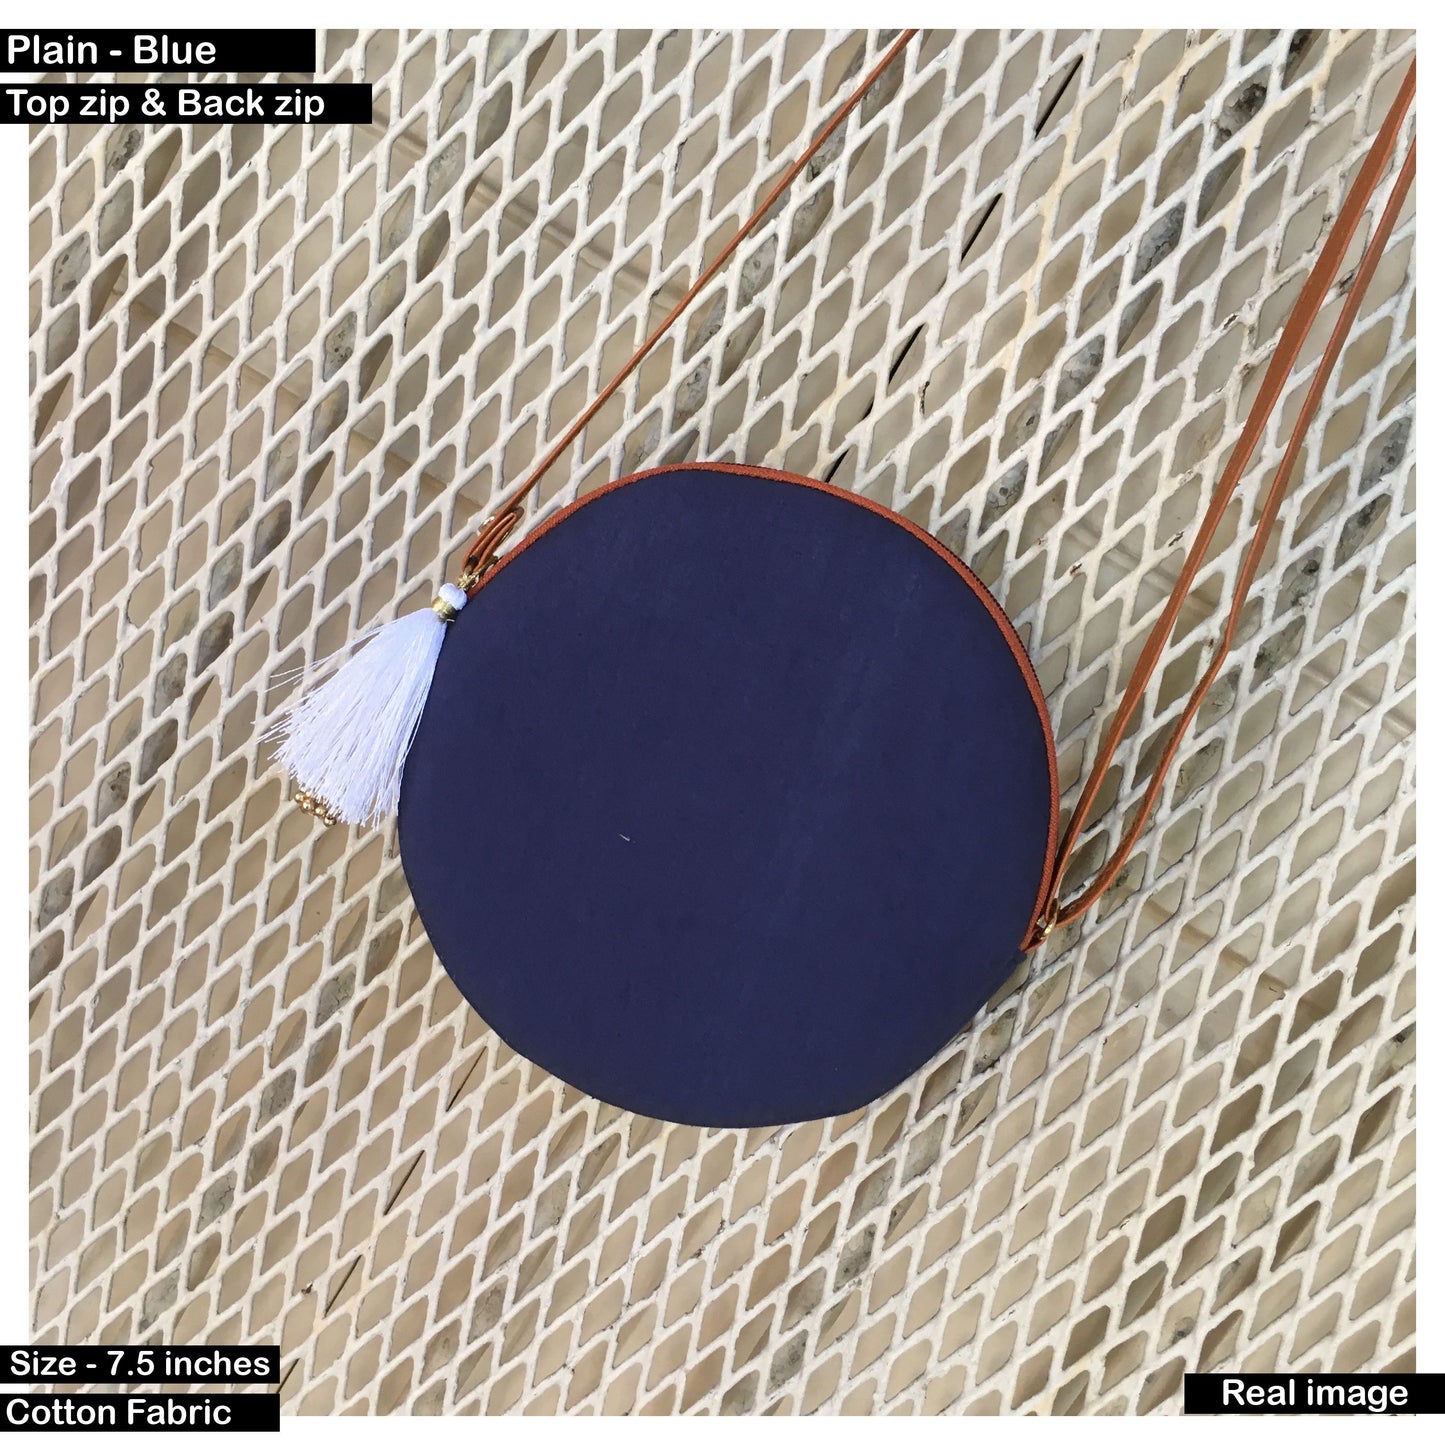 Blue Plain Cute Round Sling - Small size